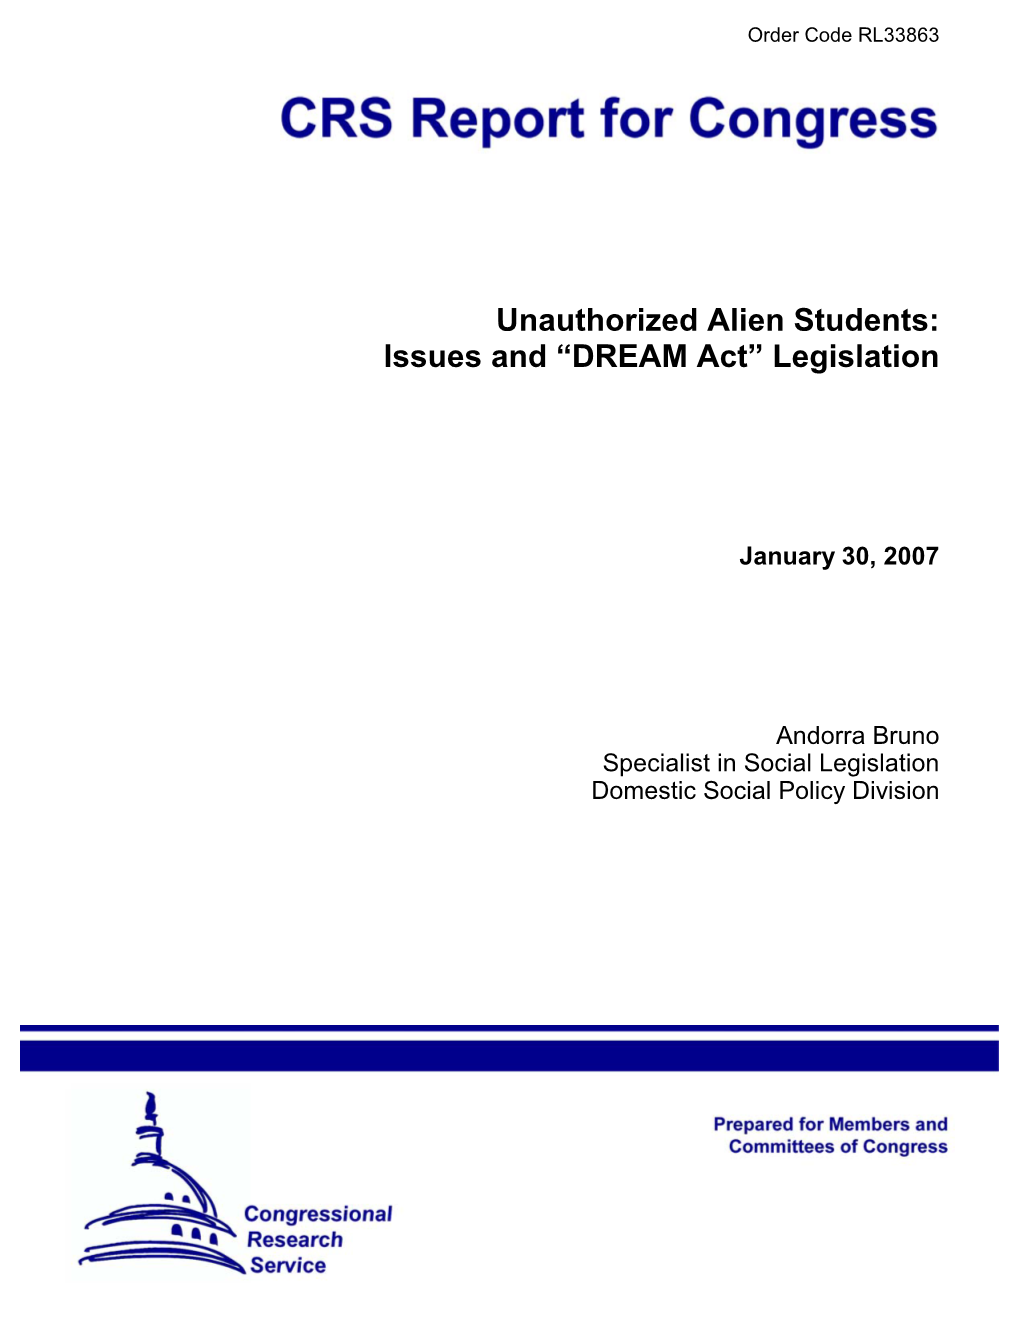 Issues and "DREAM Act" Legislation